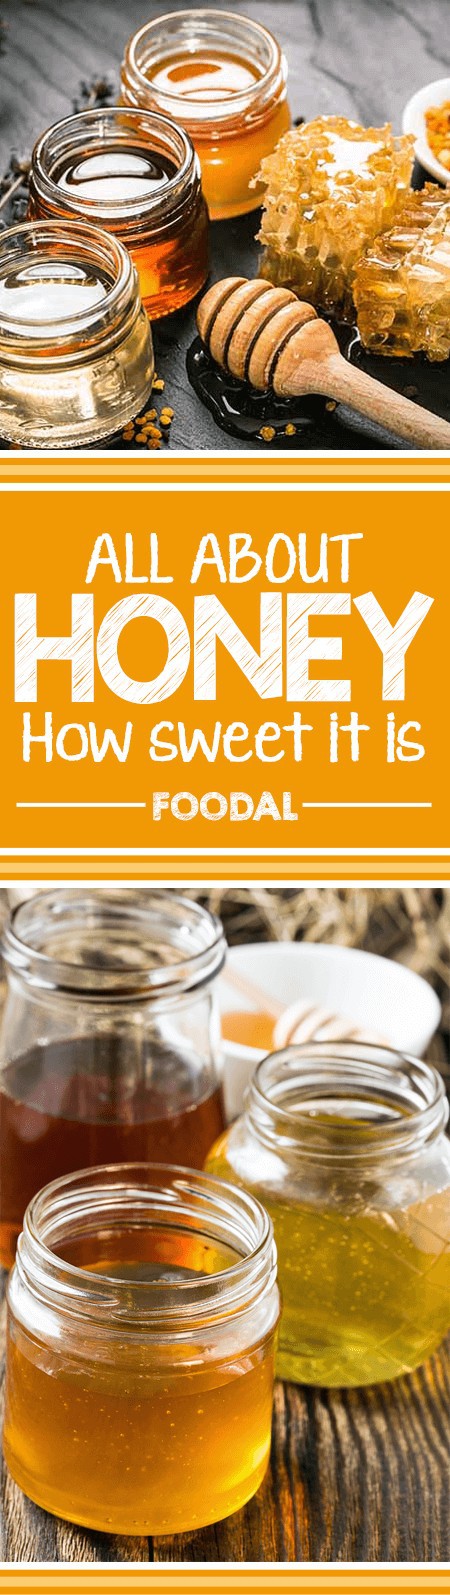 Honey is sweet, sticky, and simply delicious. Available in lots of colors and flavors it still remains a completely natural product. Learn about different varieties that can be really healthy for you, too! Read on for everything you need to know about nature’s sweet golden nectar. https://foodal.com/knowledge/paleo/honey-types-and-healing-properties/